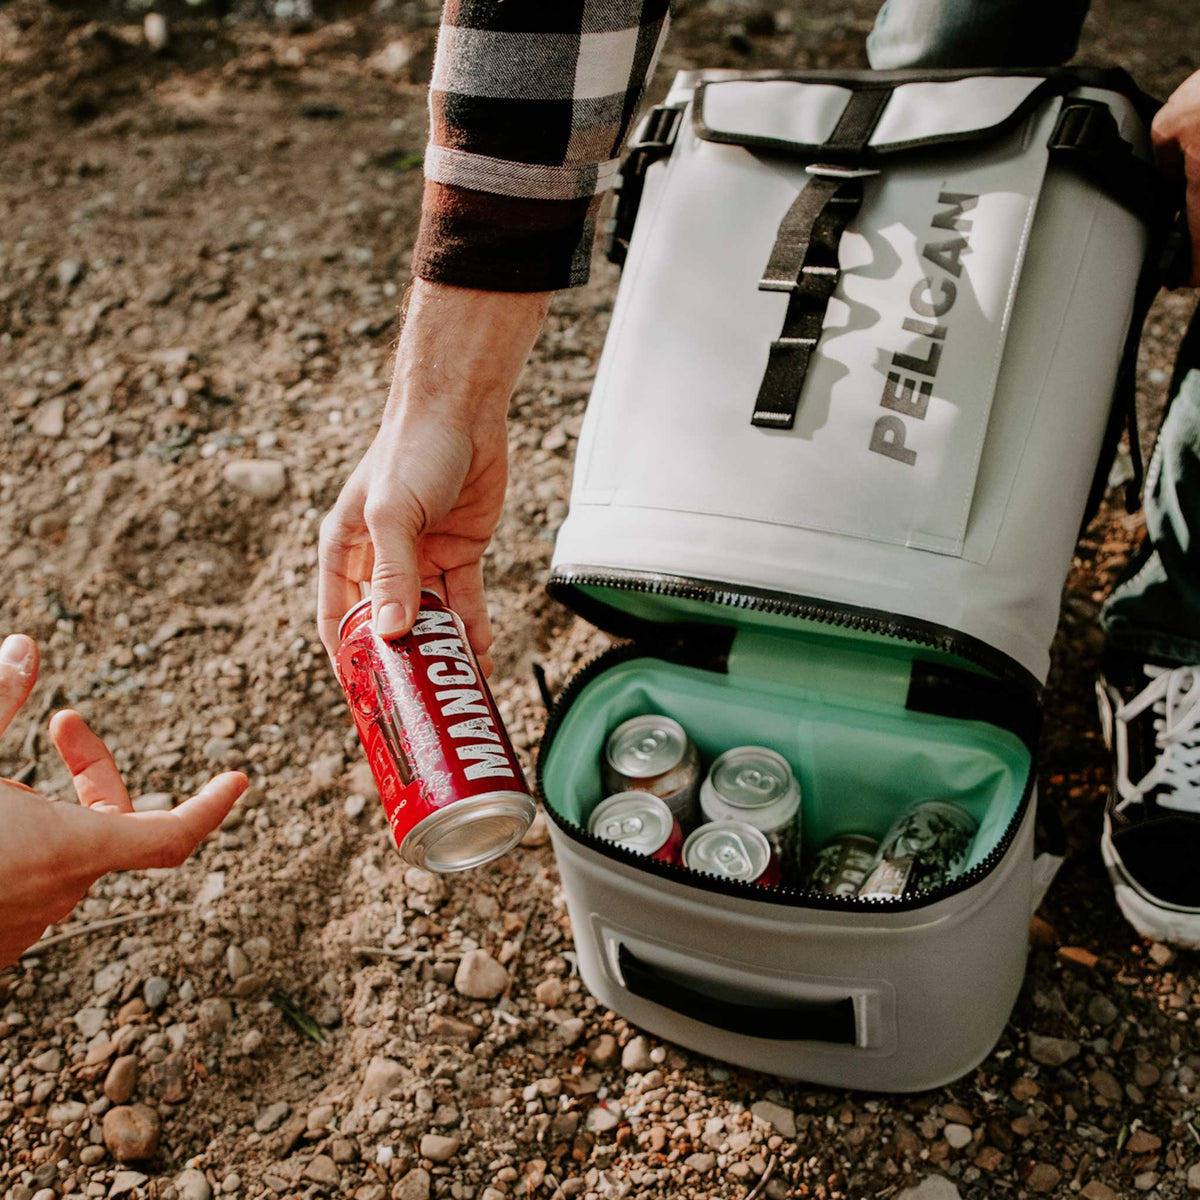 SOFT-CBKPK-LGRY Pelican™ Dayventure Backpack Soft Cooler handing a canned beverage to another person from the cooler compartment